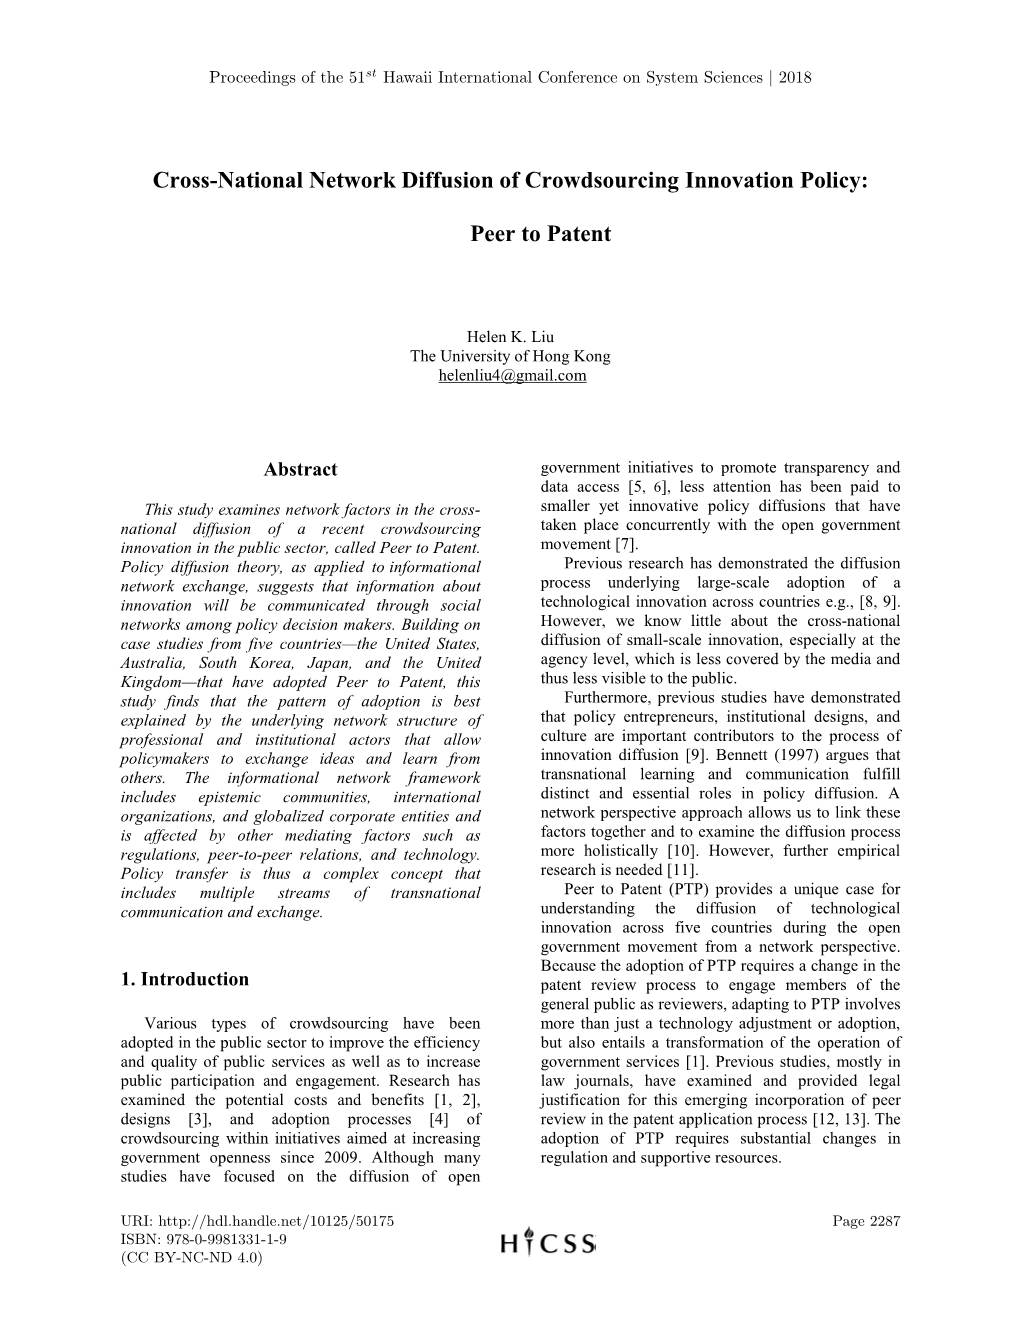 Cross-National Network Diffusion of Crowdsourcing Innovation Policy